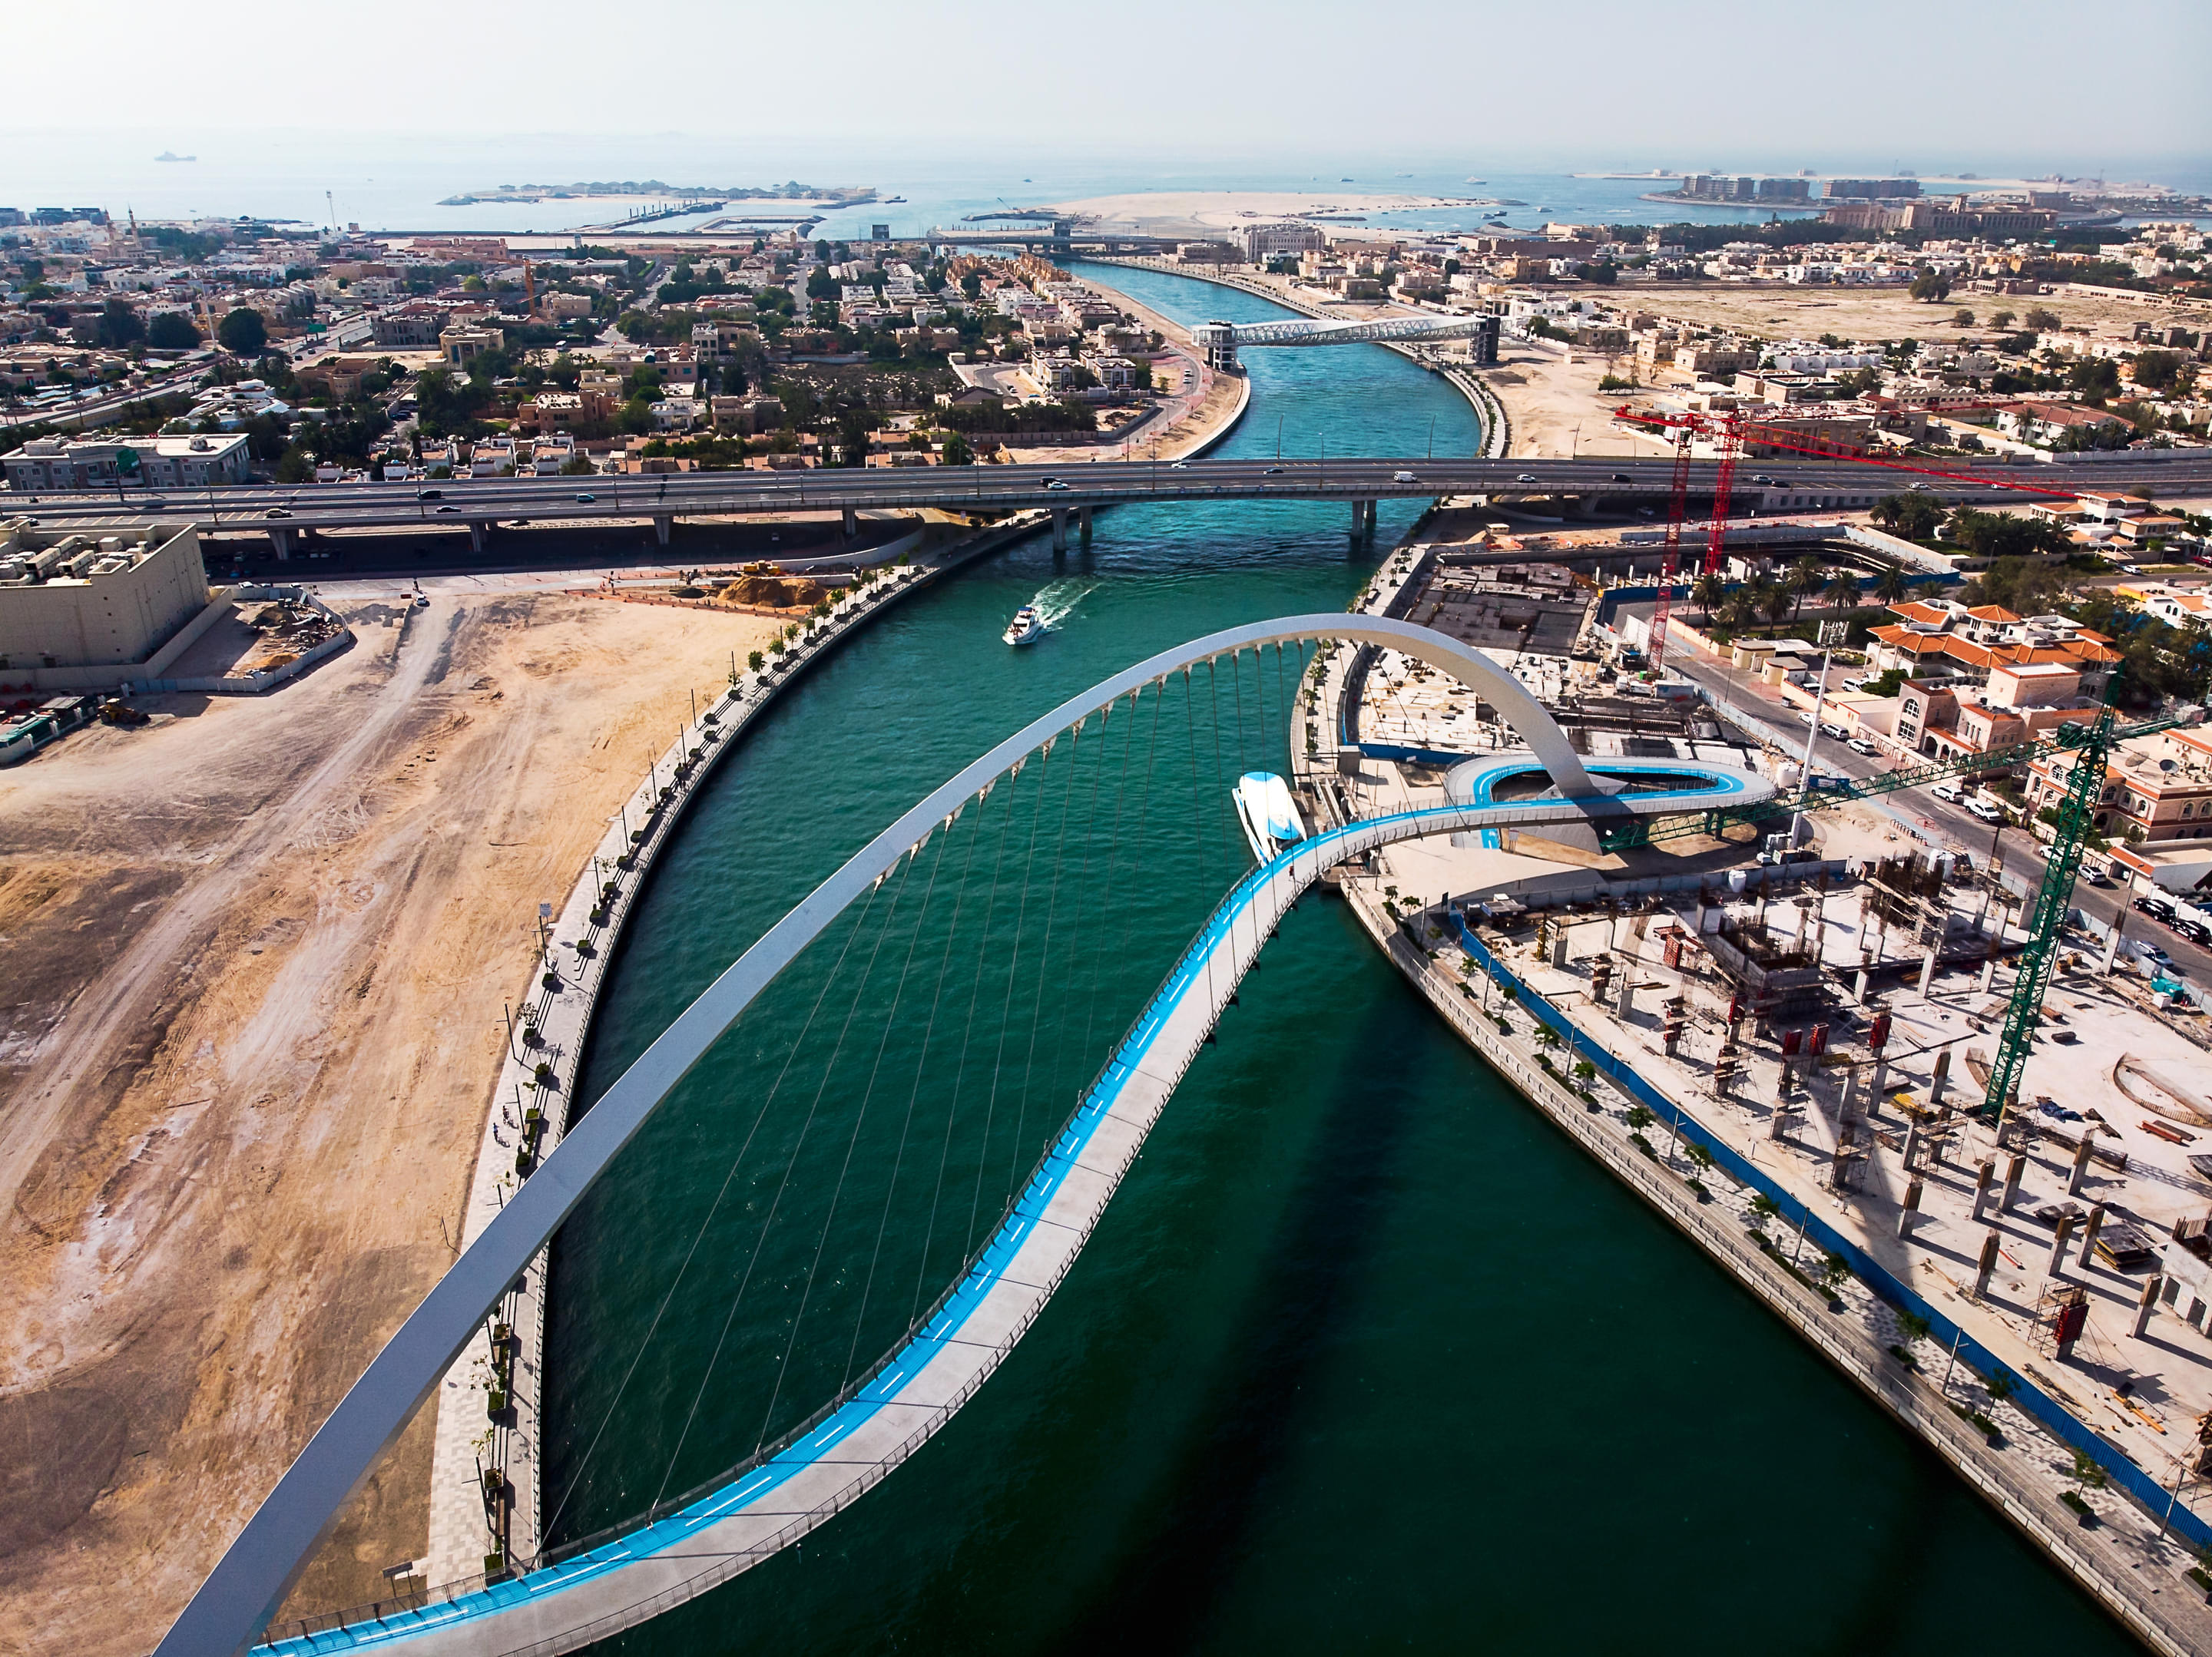 Dubai Water Canal Overview